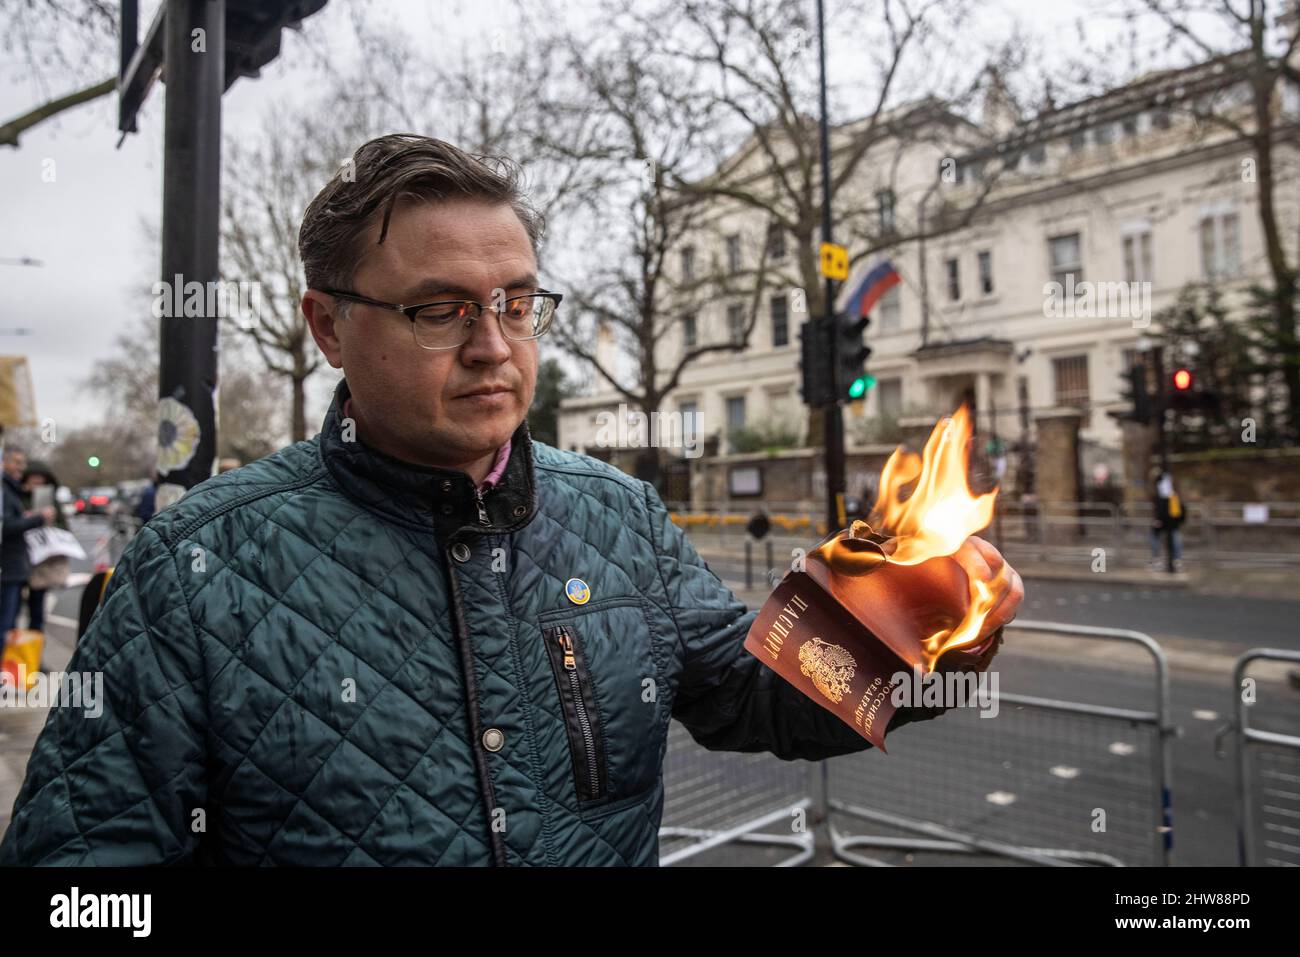 London, England, UK 4th March 2022: A Russian citizen burns his Russian passport outside the Russian London Embassy in protest against the invasion of Ukraine by the Russian dictator Vladmir Putin. Bayswater, London, England, UK 4th March 2022 Credit: Jeff Gilbert/Alamy Live News Stock Photo